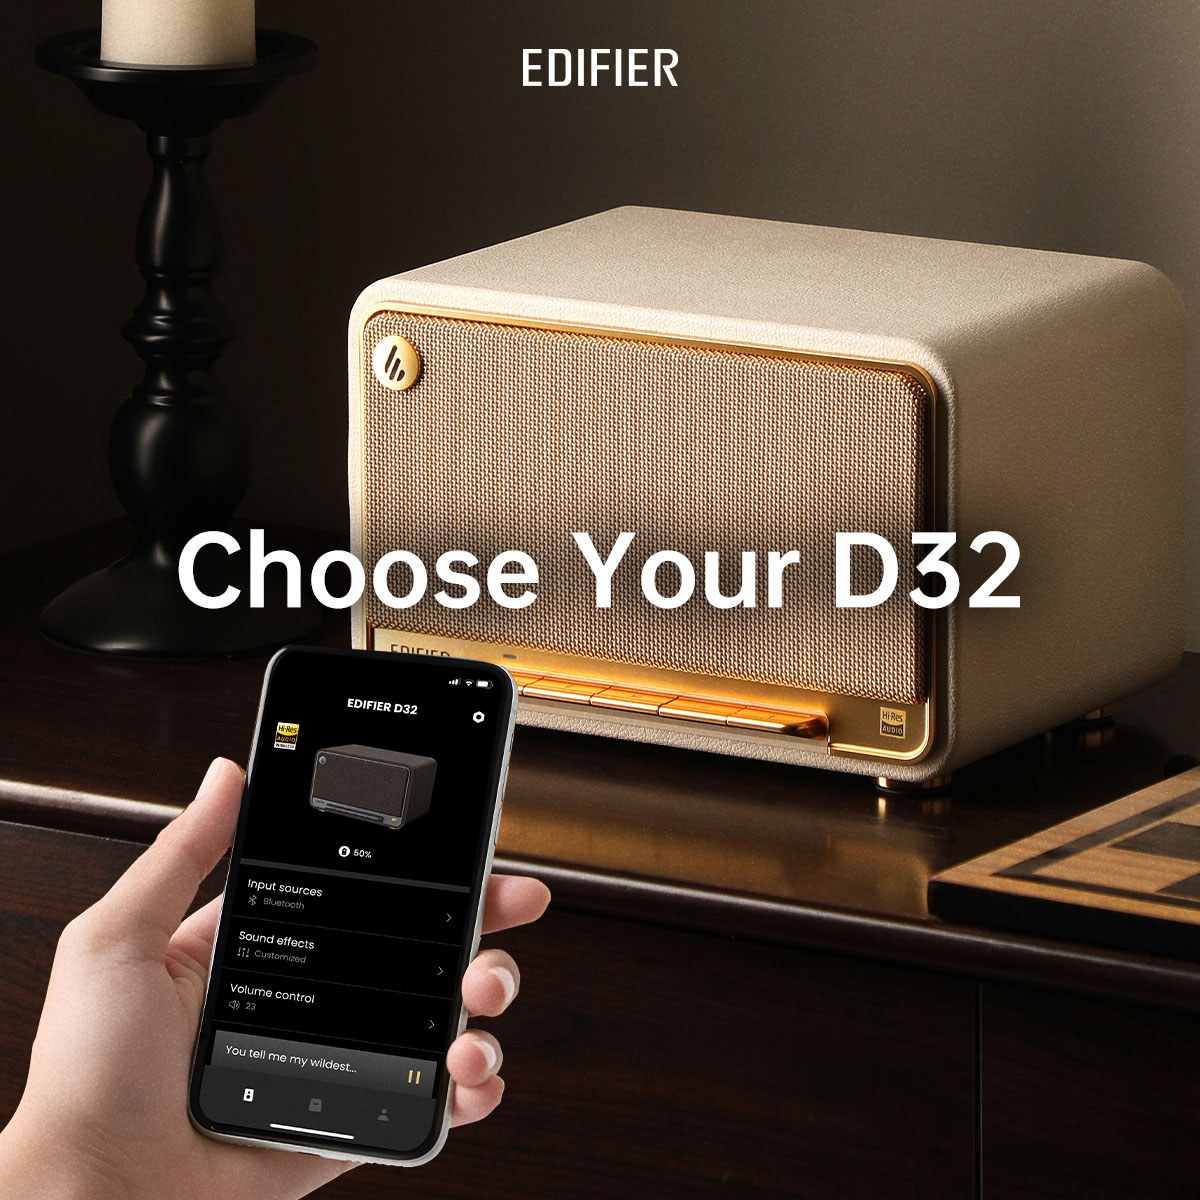 Unlock the Power of D32: Your Ultimate Sound Companion! 🎶 Explore seamless connectivity, convenient control, and immersive sound. Get ready to elevate your audio experience! 

#EDIFIER #D32 #Edifiermalaysia #EdifierD32 #PortableSpeaker #HiResAudio #Wireless #AppleAirPlay